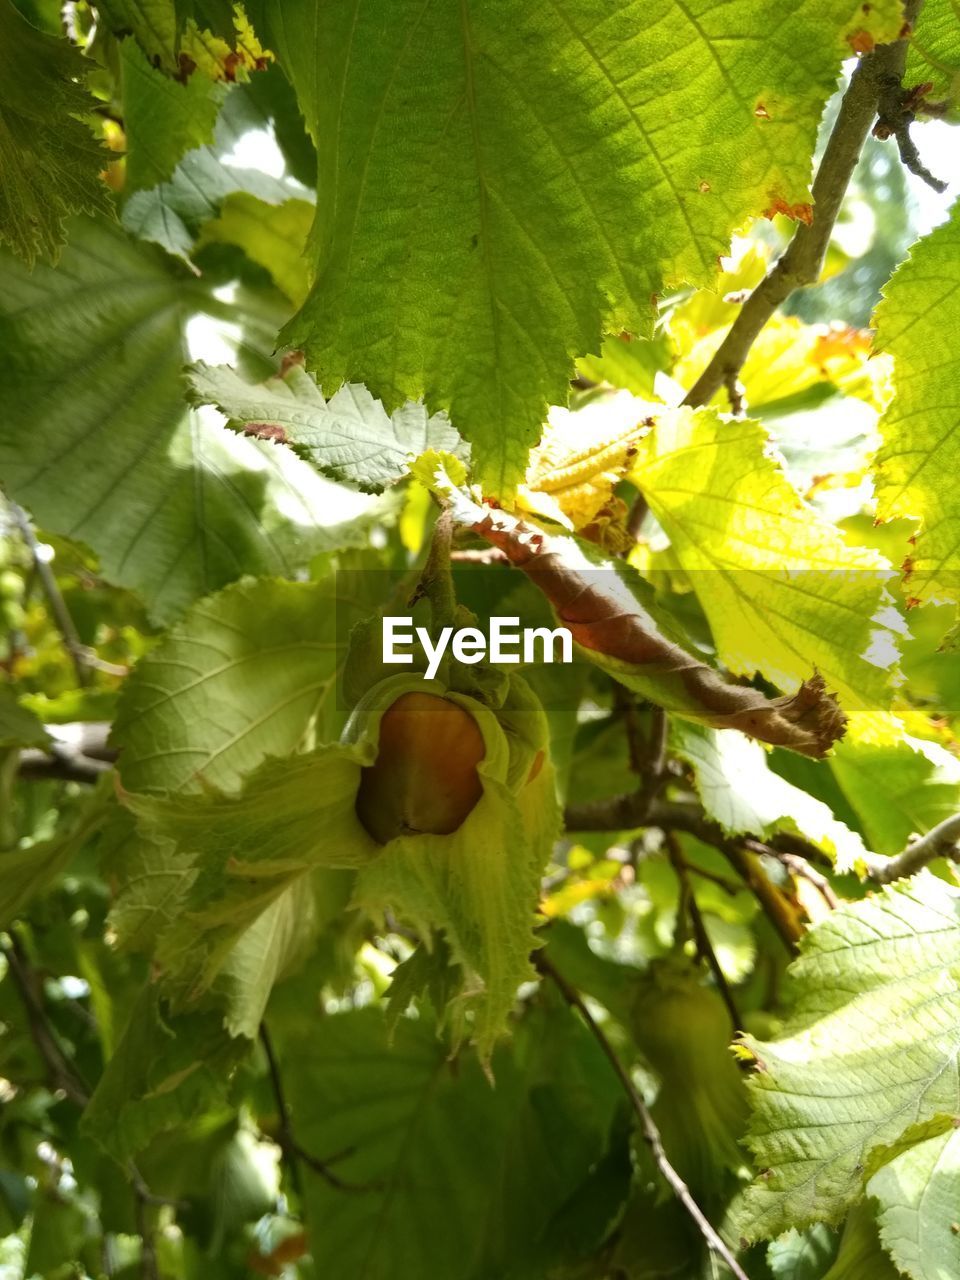 LOW ANGLE VIEW OF FRUITS ON TREE BRANCH